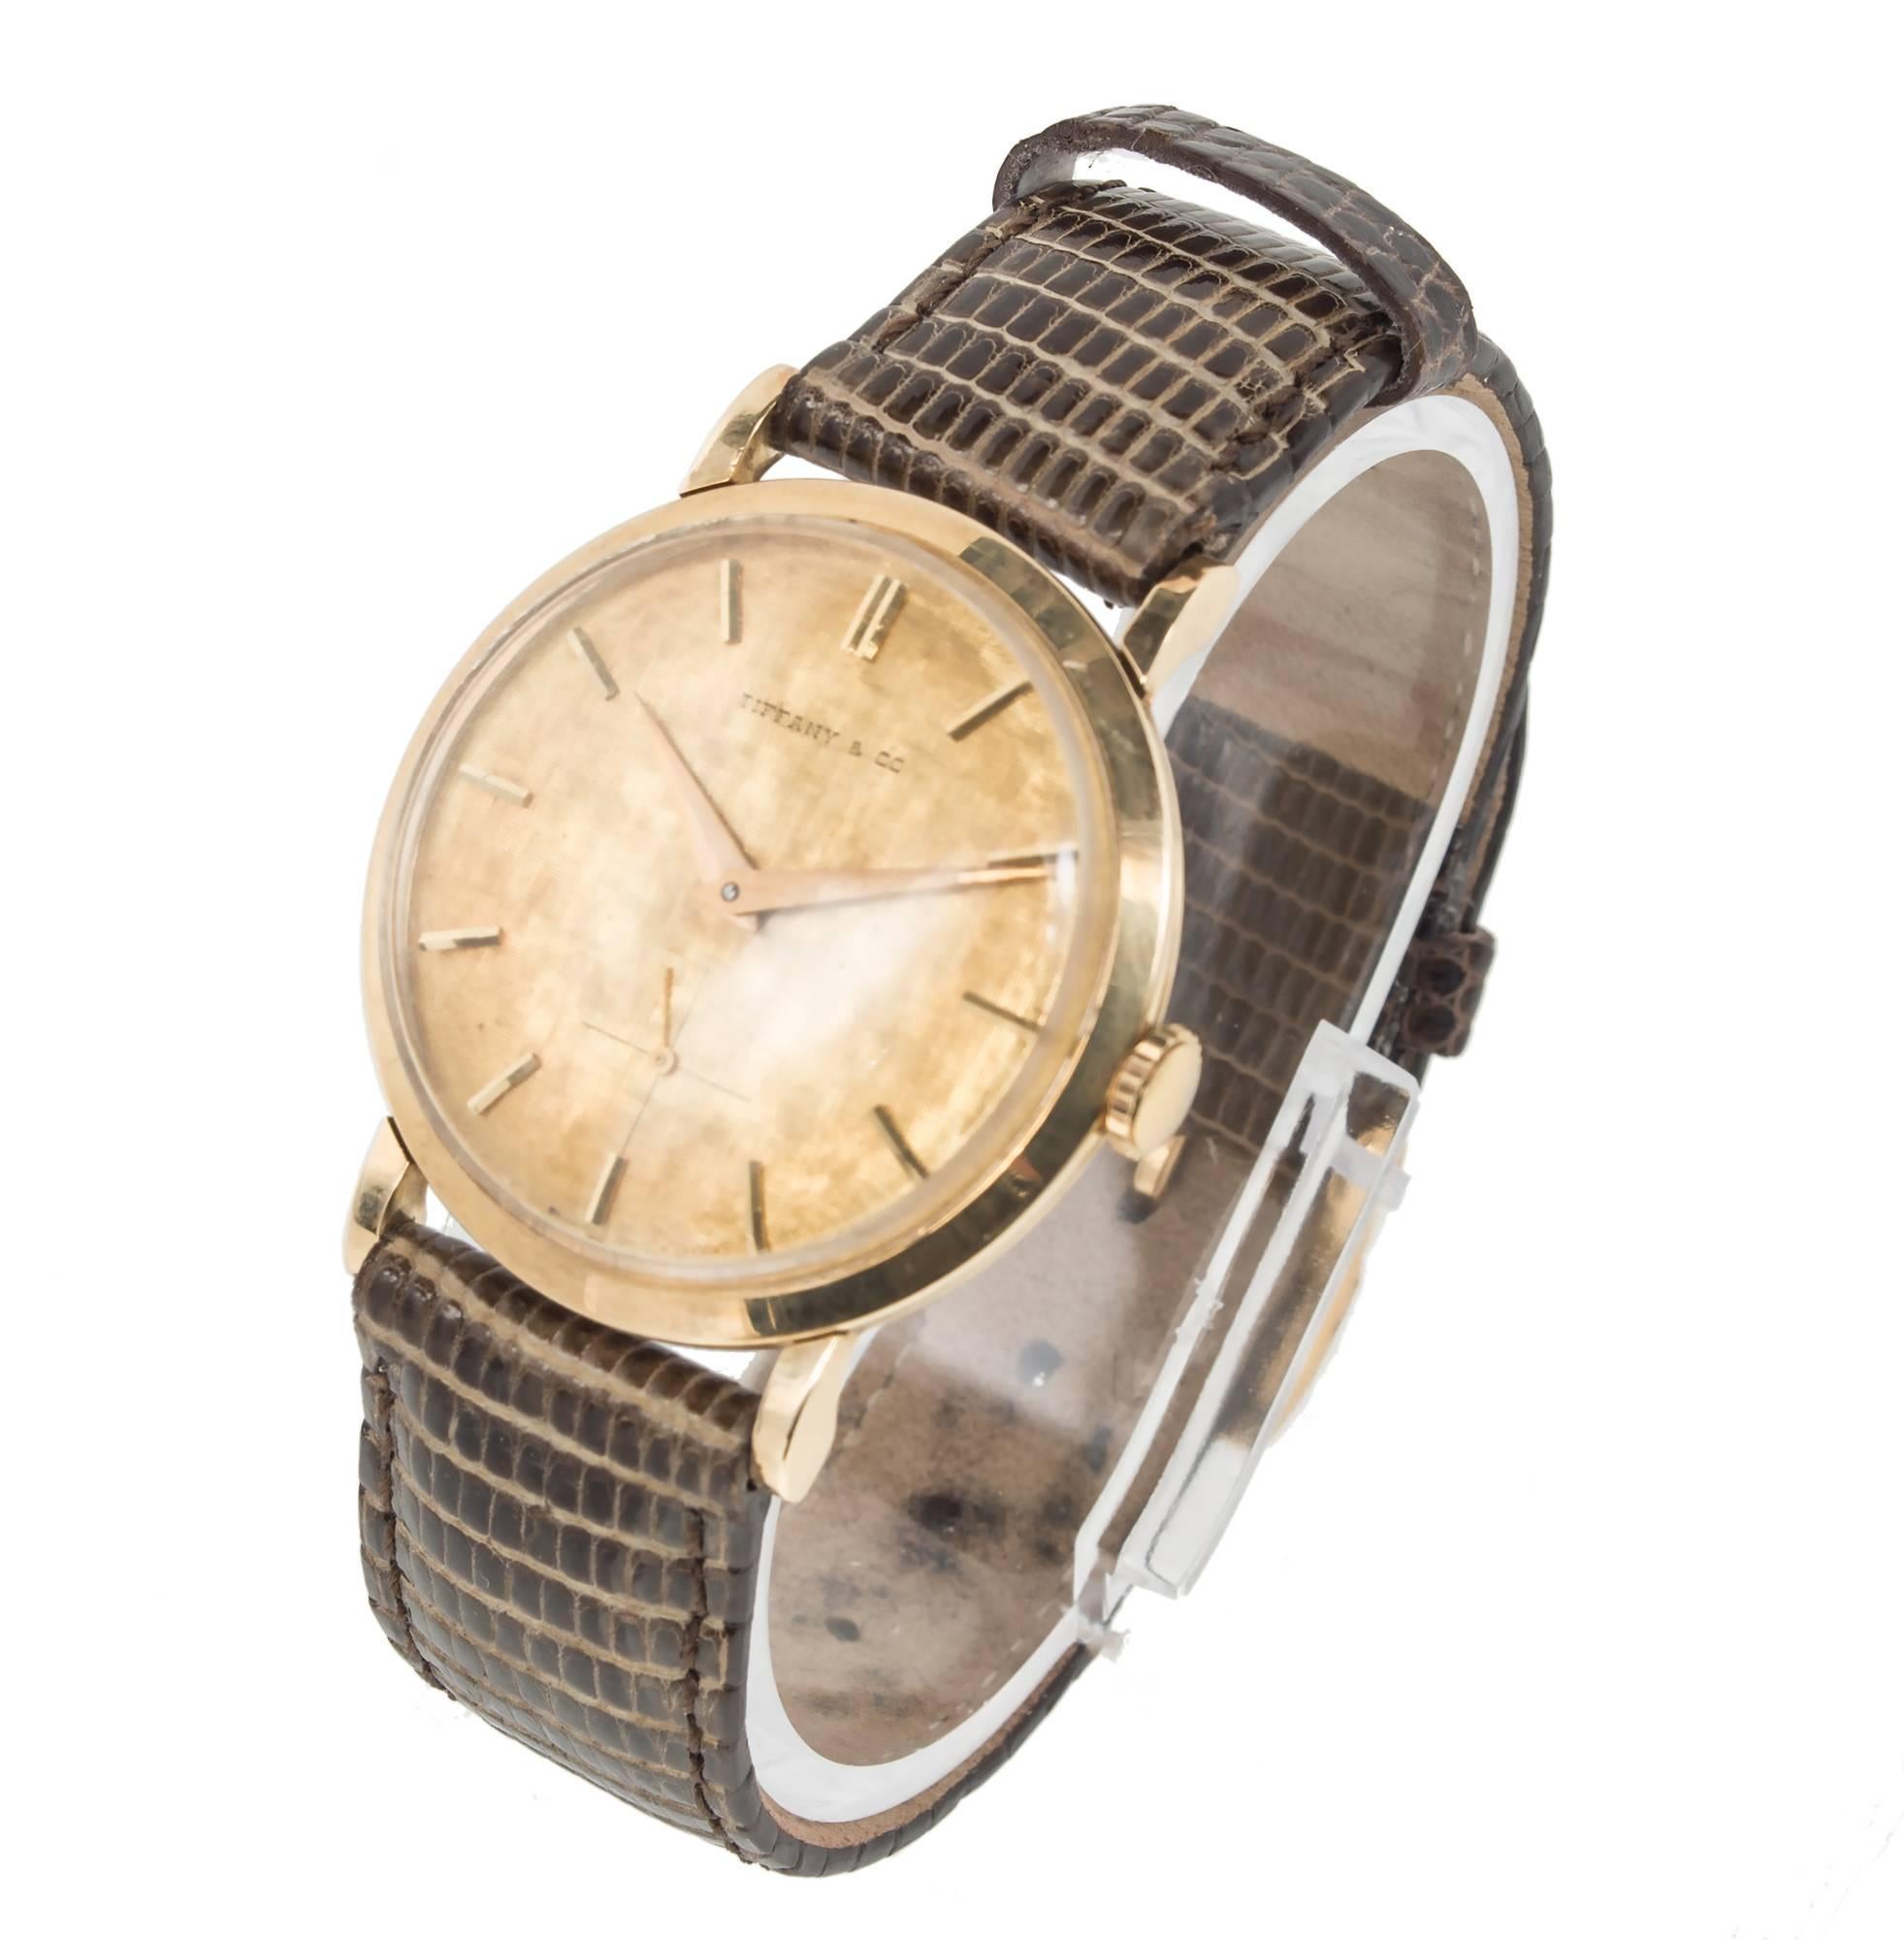 Tiffany & Co. Movado men's wristwatch is a timeless piece, crafted with 14k yellow gold, this wristwatch retailed by the renowned Tiffany & Co. brand effortlessly blends classic style with modern design. Florentine gilt dial with natural patina,